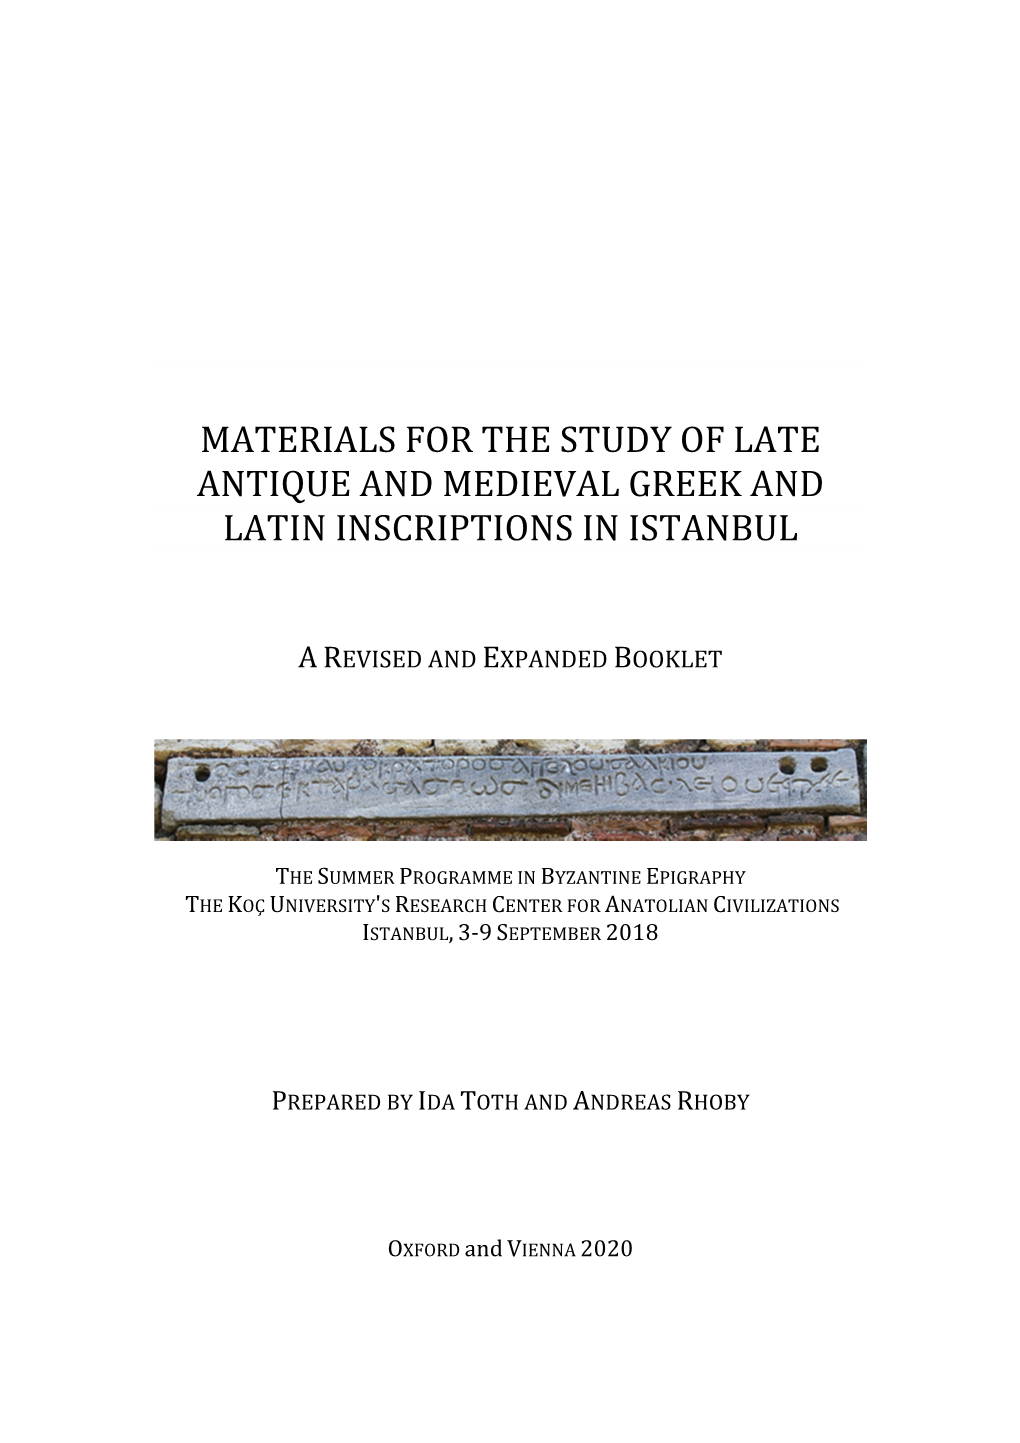 Materials for the Study of Late Antique and Medieval Greek and Latin Inscriptions in Istanbul